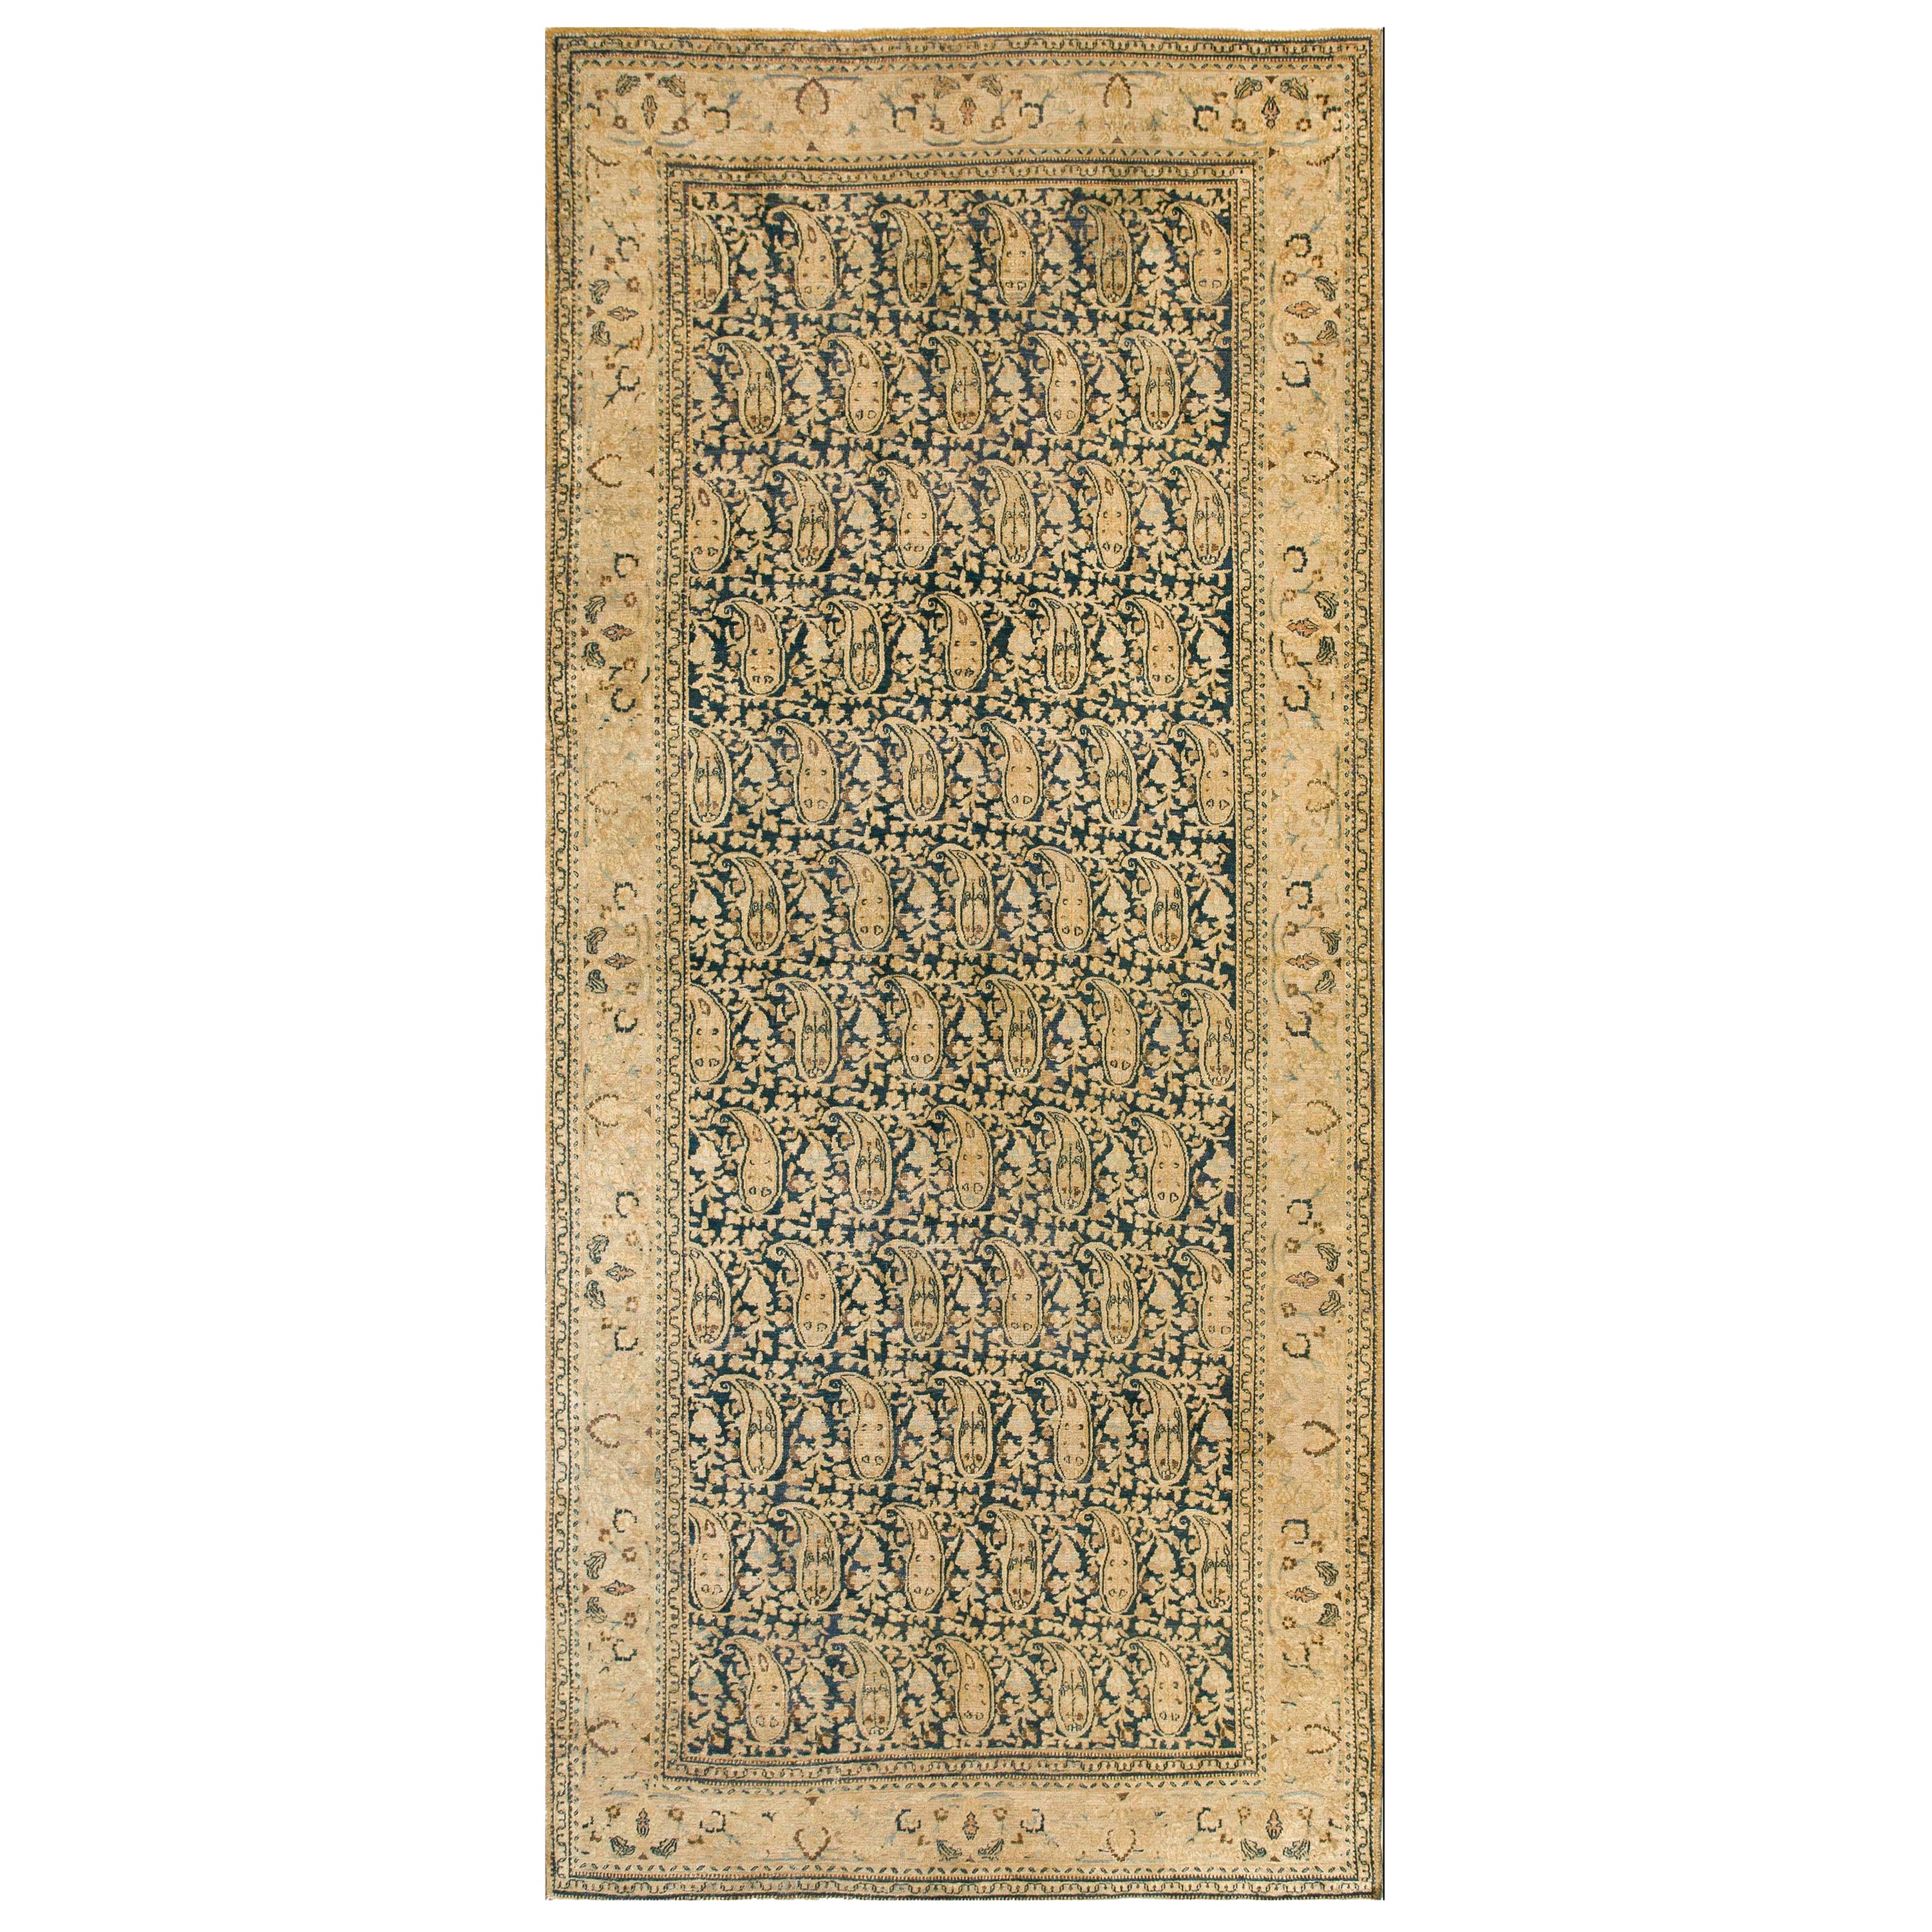 Early 20th Century N.E. Persian Moud Gallery Carpet ( 6' 8" x 15' - 203 x 457 )  For Sale